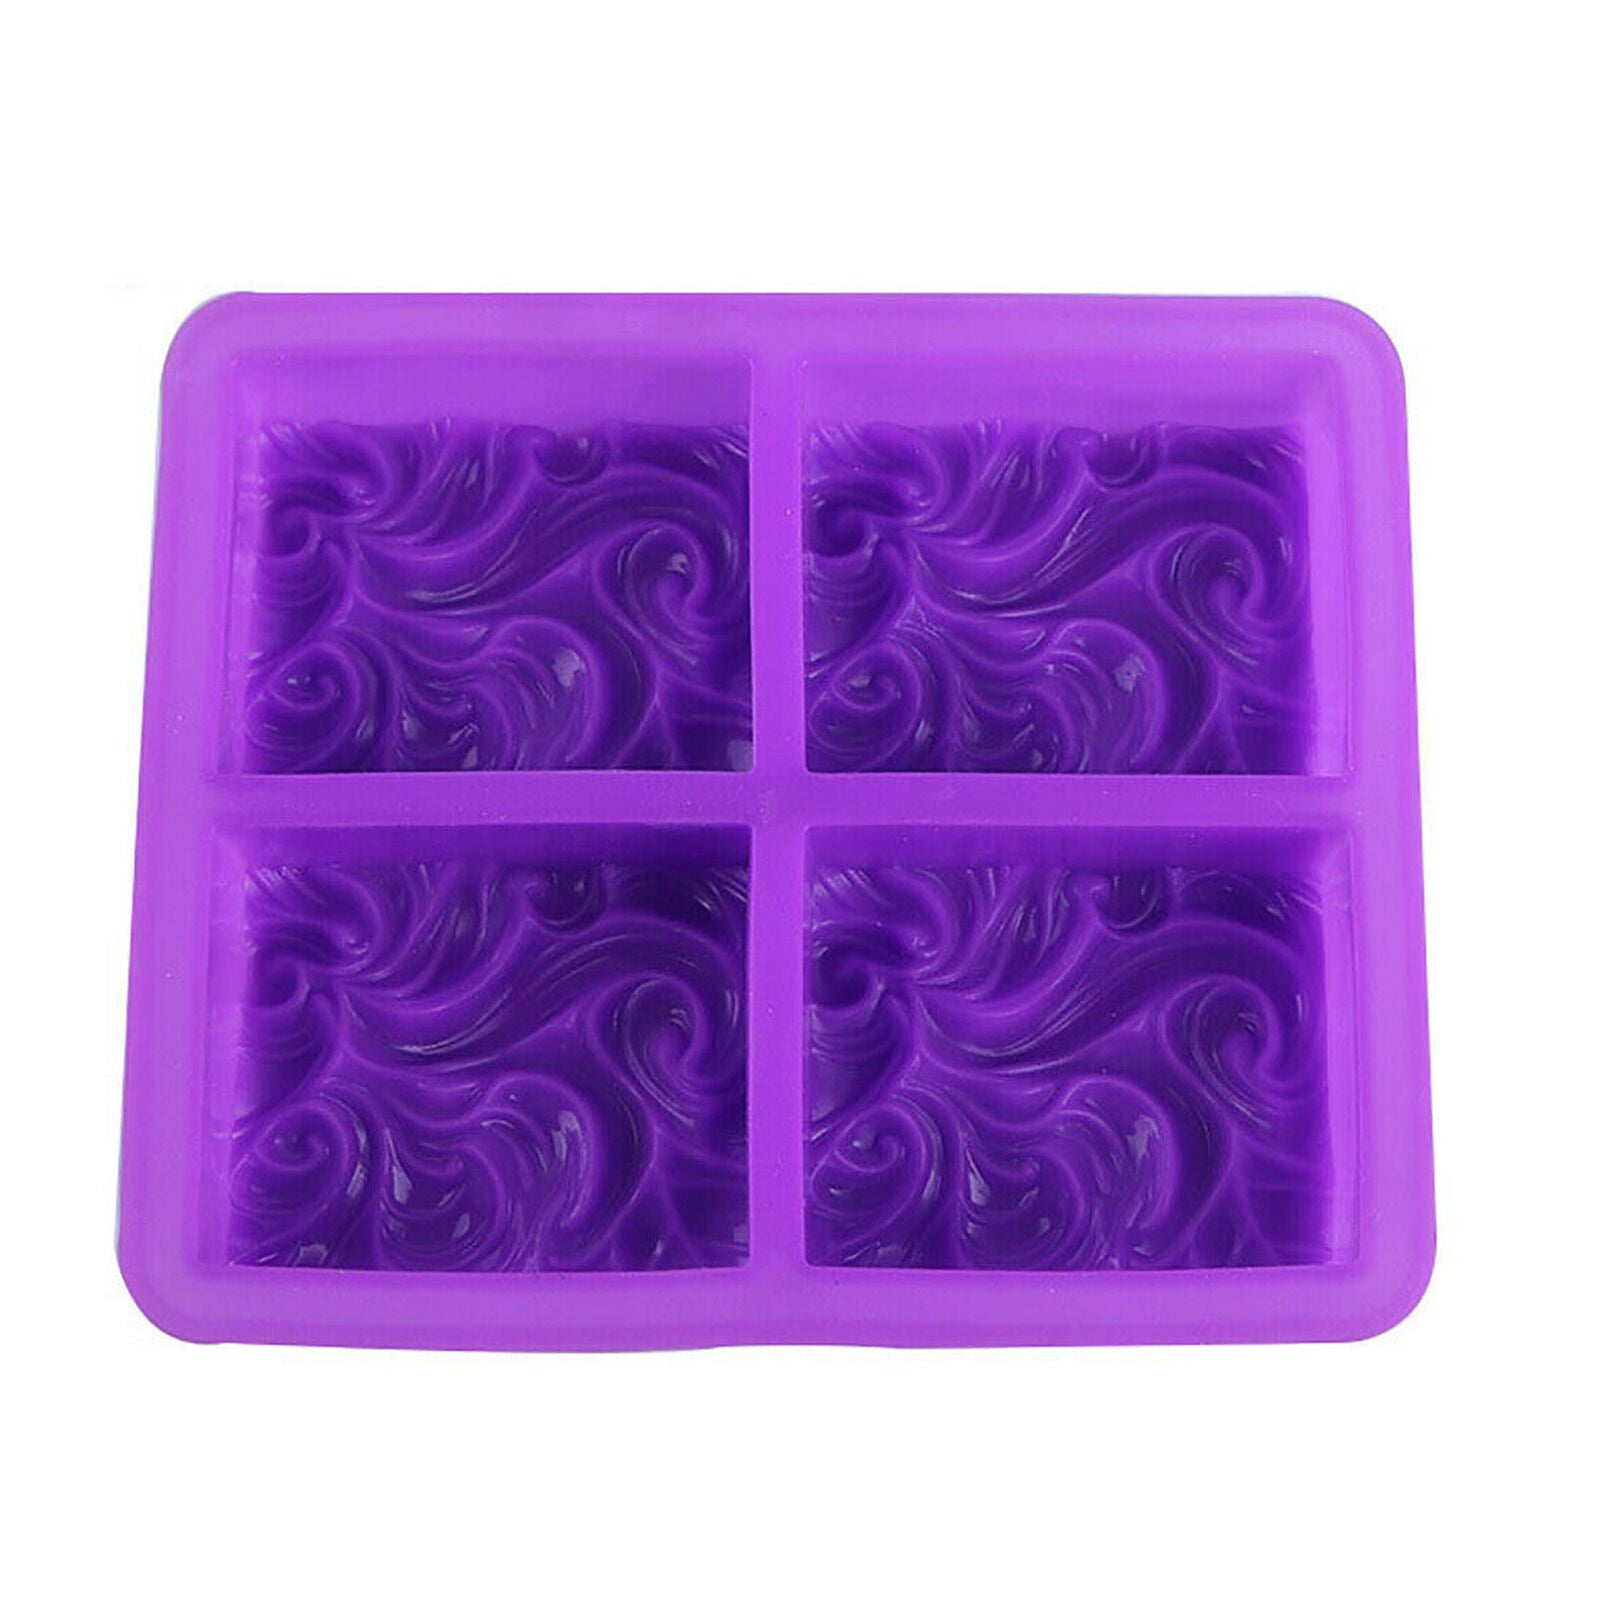 Silicone Molds Soap Candles Concrete Casting Concrete Soap Mold Casting Mold